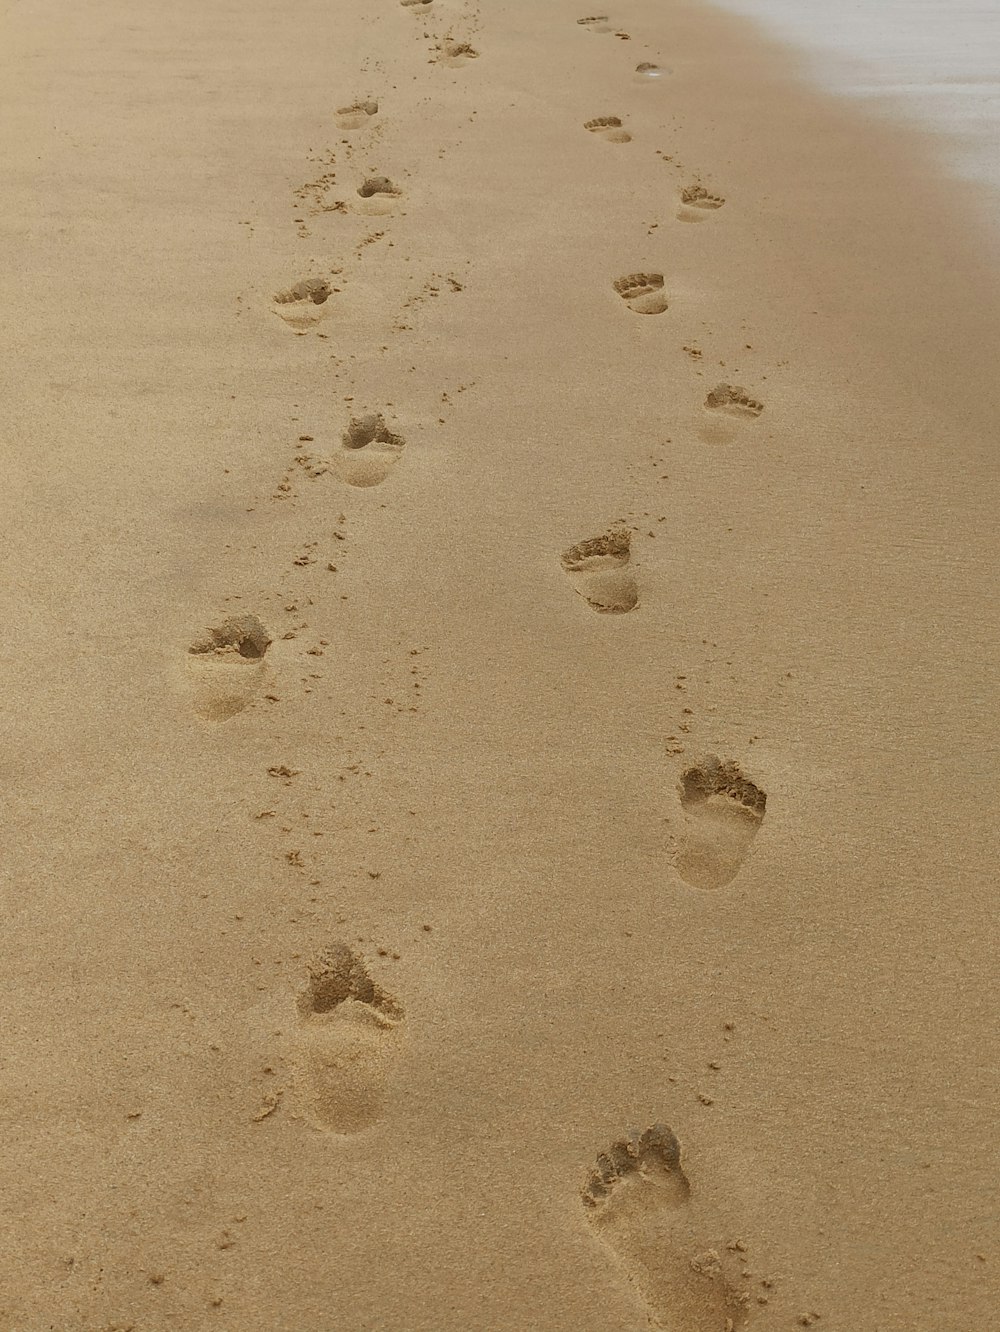 Footprints on the sand during daytime photo – Free Brown Image on Unsplash